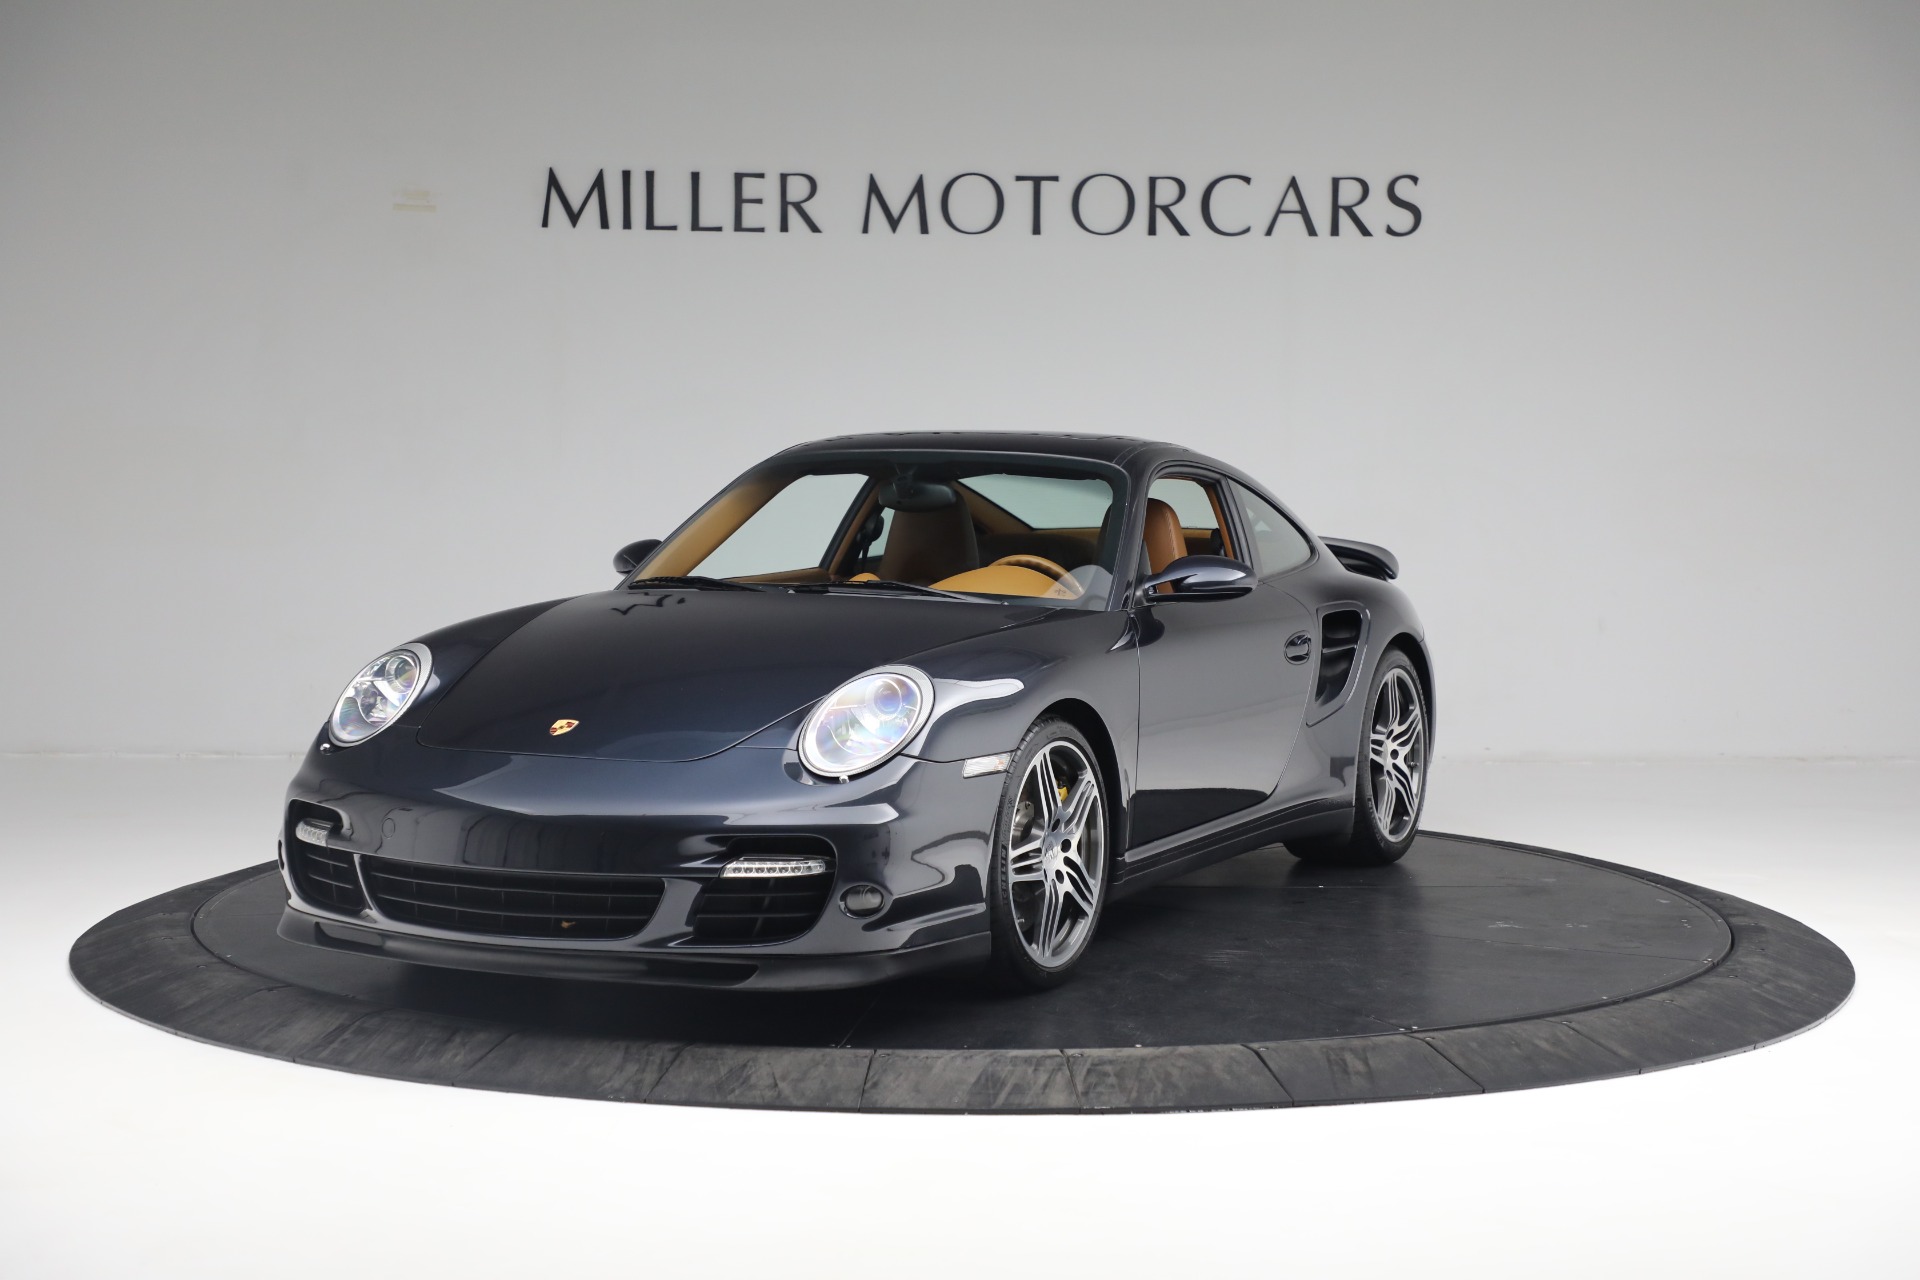 Used 2007 Porsche 911 Turbo for sale $119,900 at Aston Martin of Greenwich in Greenwich CT 06830 1